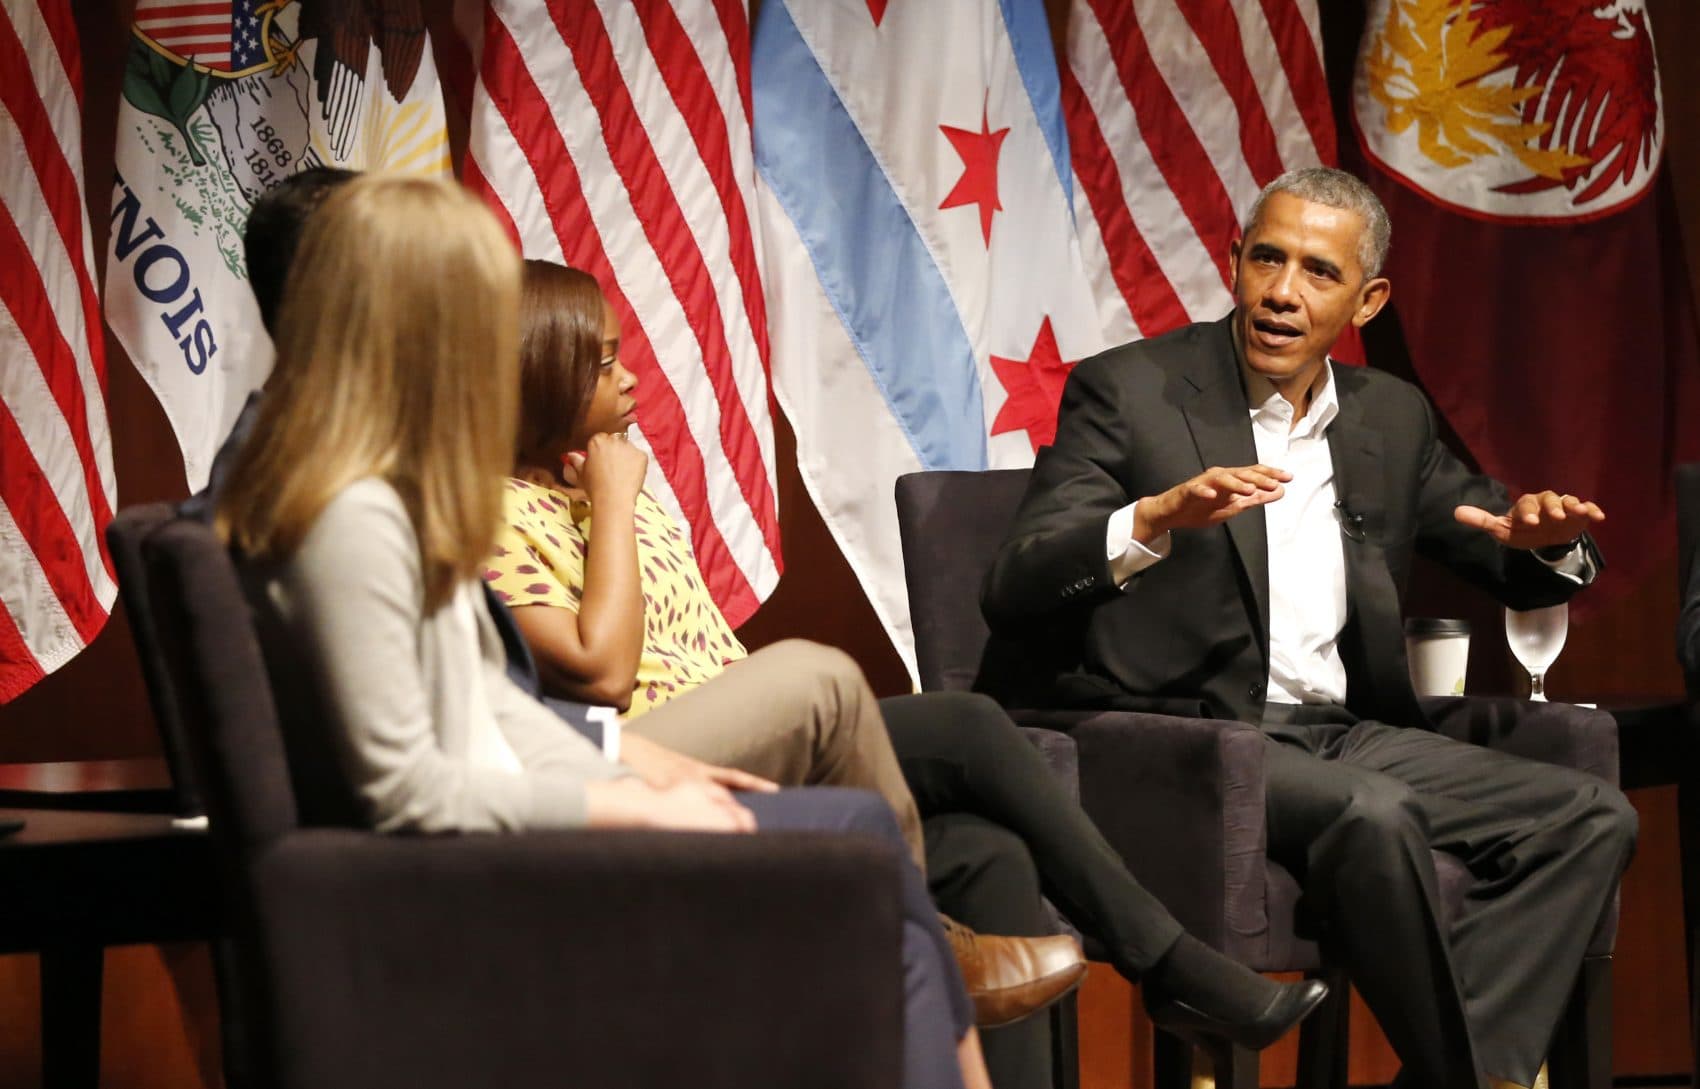 The former president has worsened the Democratic Party’s public relations problem, writes Miles Howard. Pictured: Former President Barack Obama hosted a conversation on civic engagement and community organizing, Monday, April 24, 2017, at the University of Chicago. It's the former president's first public event of his post-presidential life in the place where he started his political career. (Charles Rex Arbogast/AP)